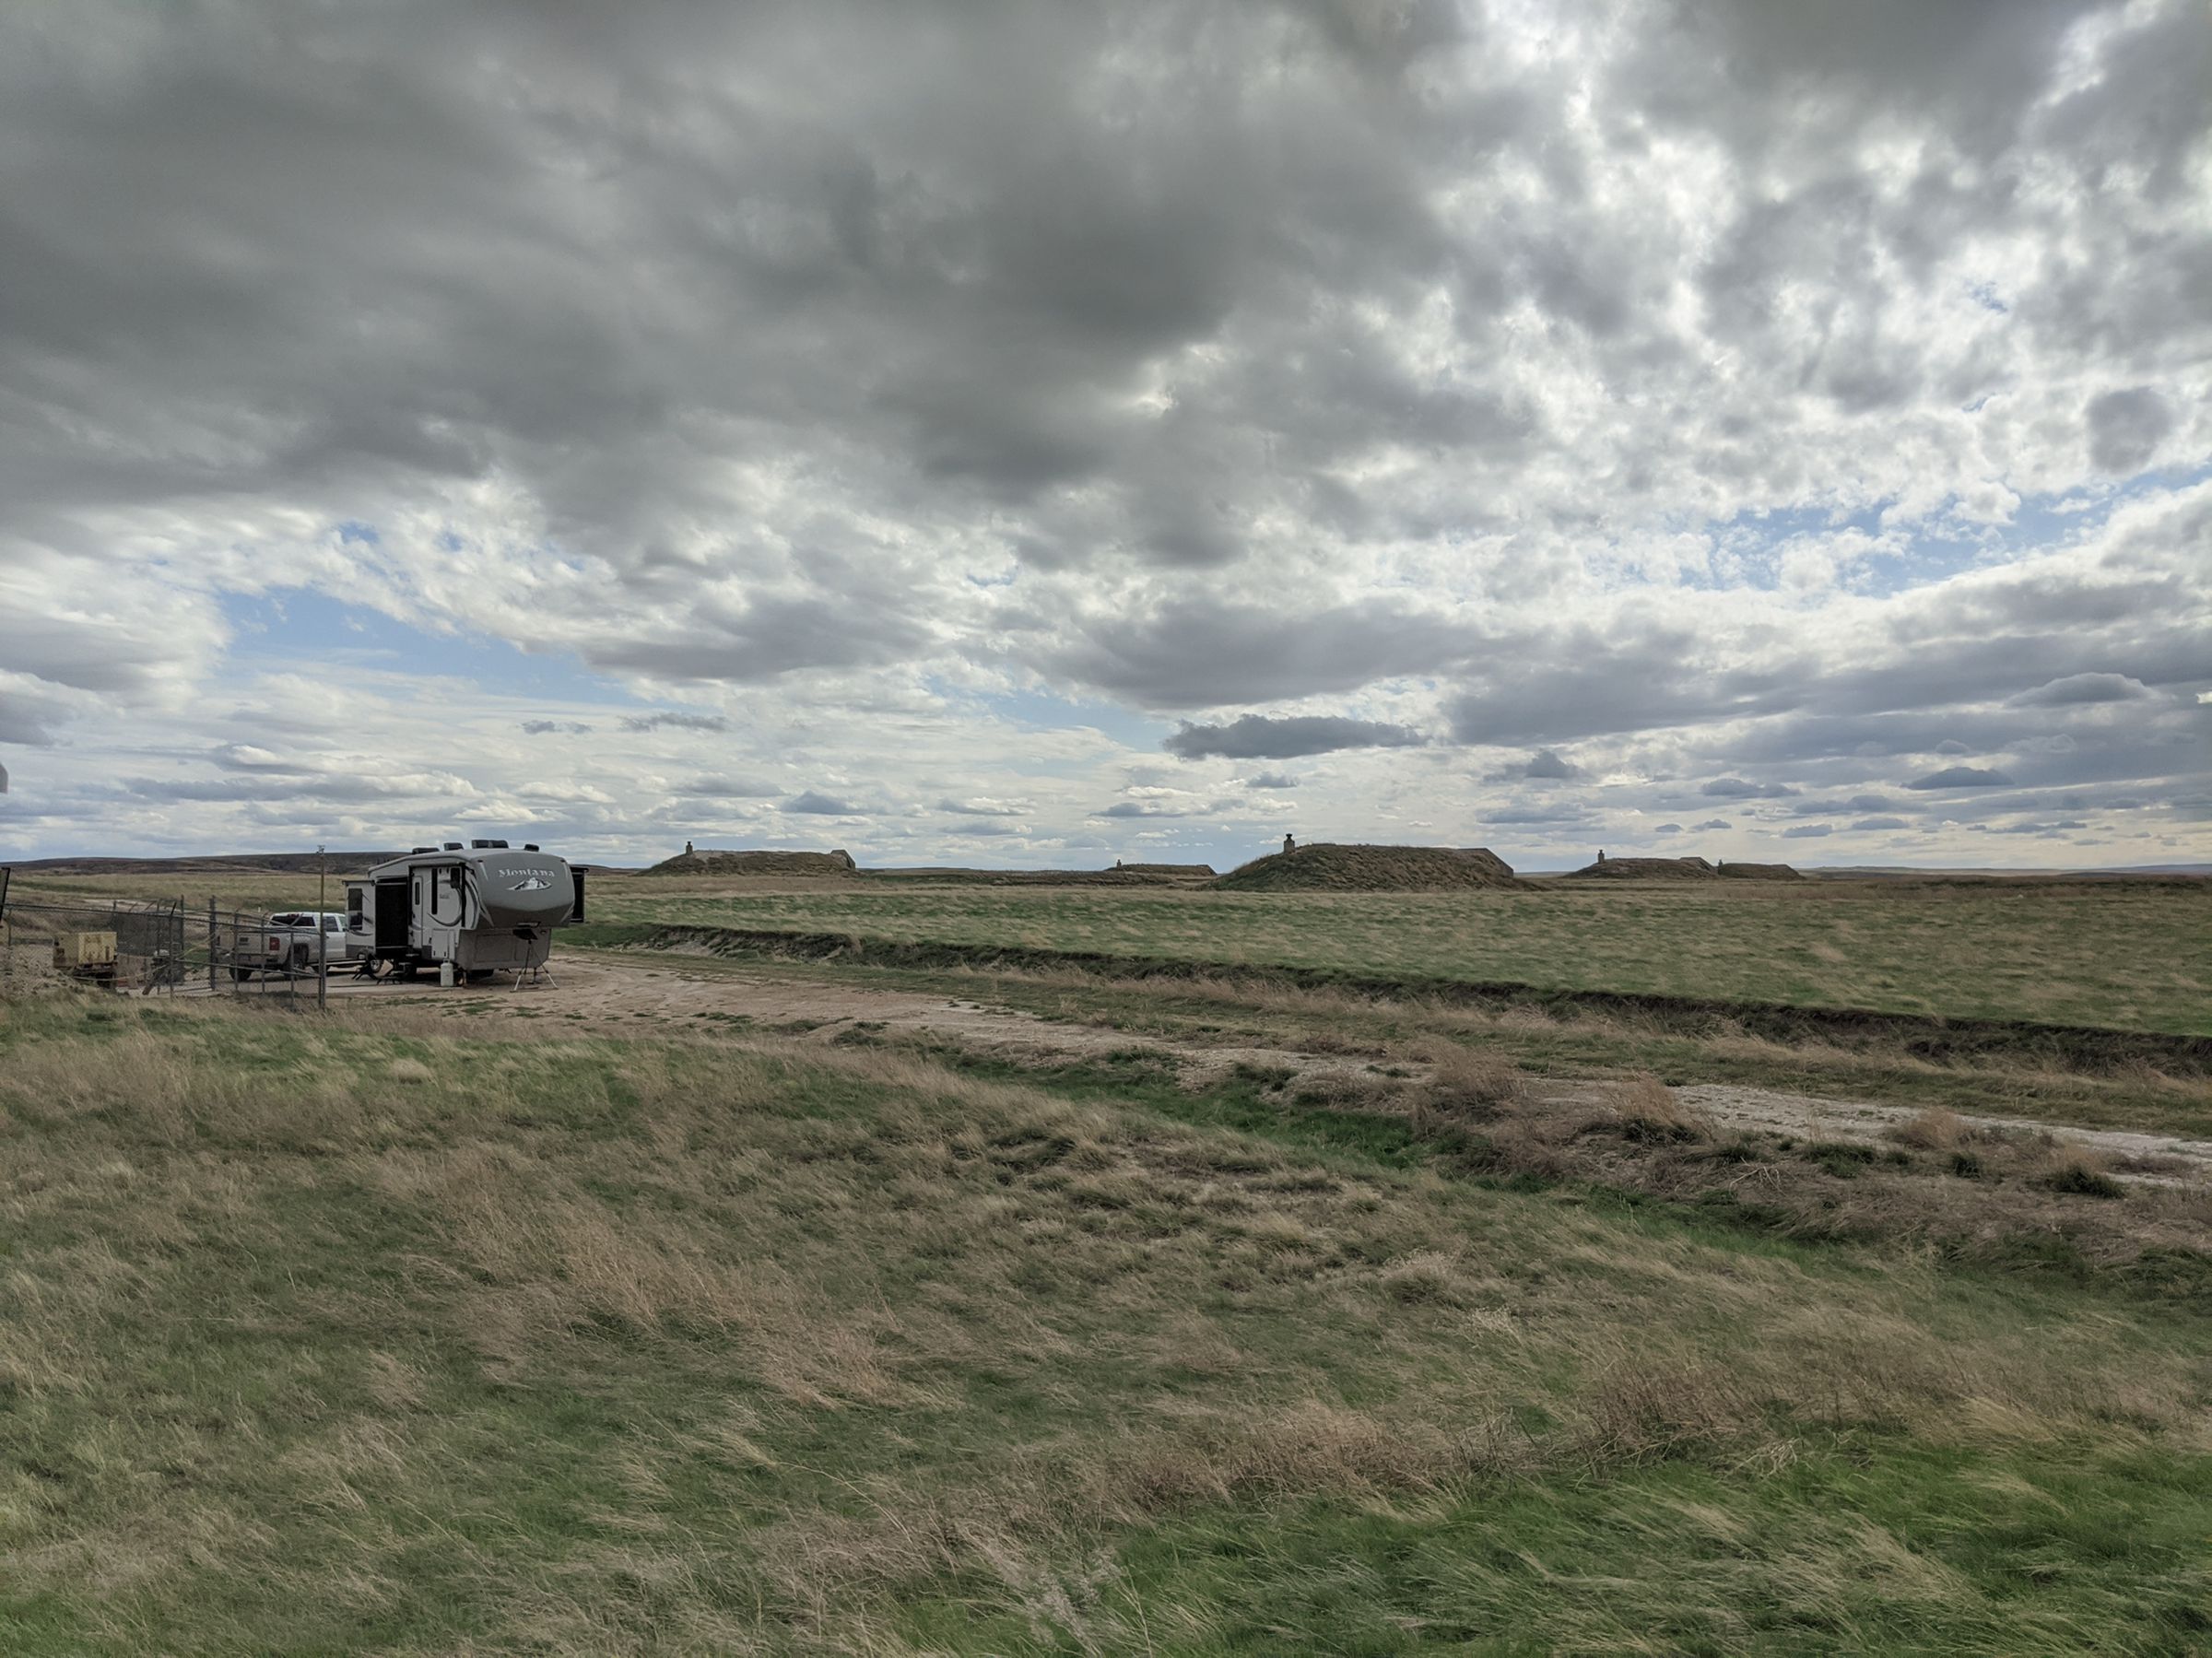 A landscape photo showing Tom and Mary’s truck, camper van and neighboring bunkers with a cloudy sky.